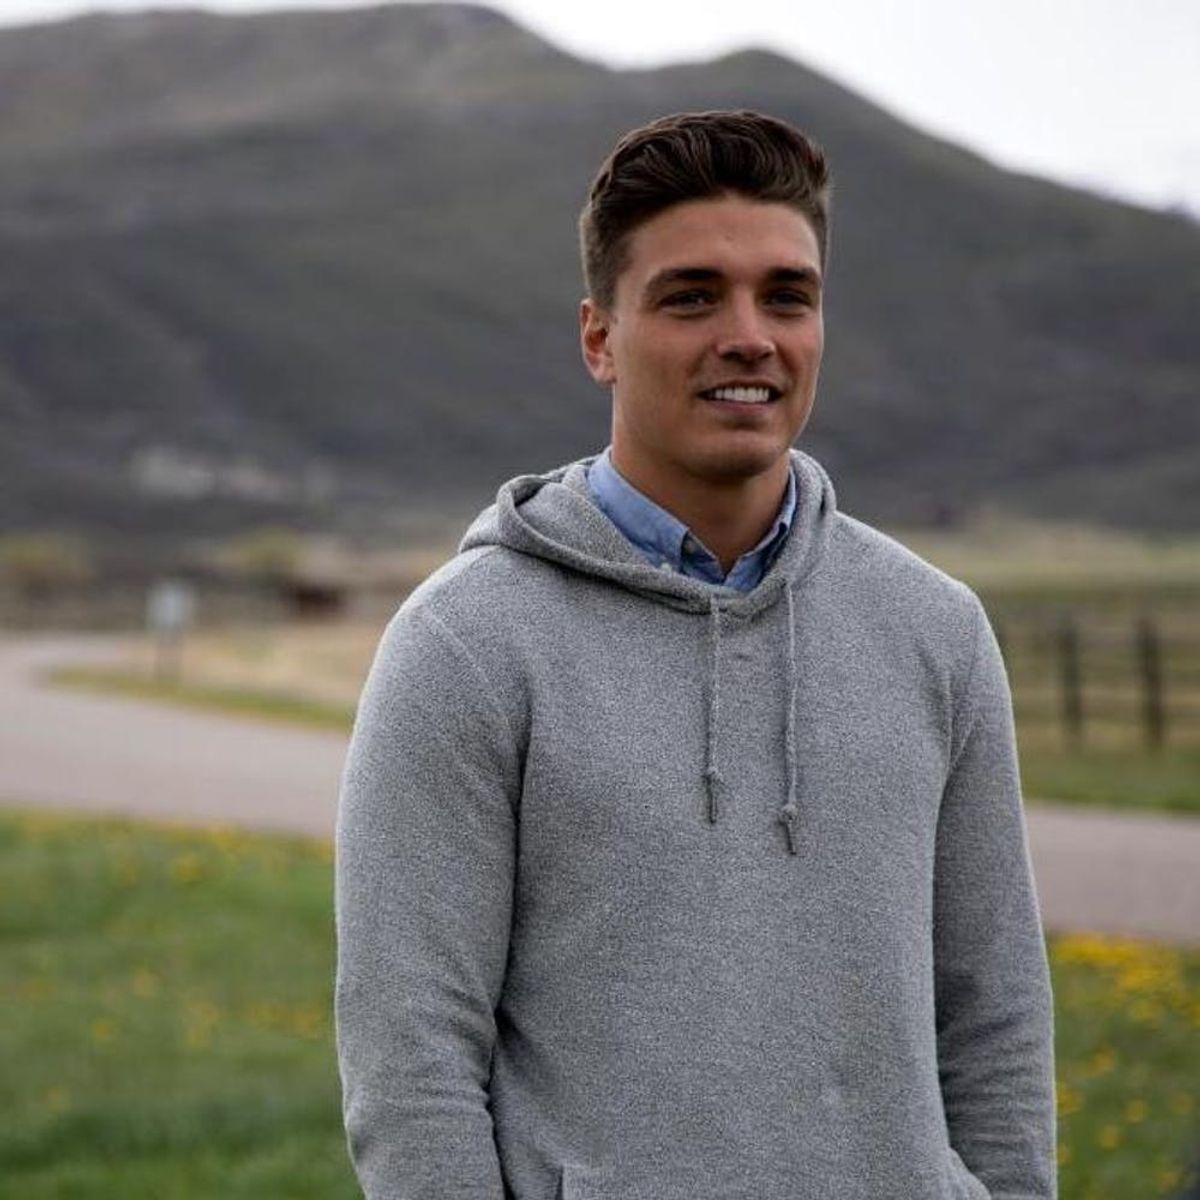 The Bachelorette’s Dean Unglert Will Continue His Search for Love on Bachelor in Paradise